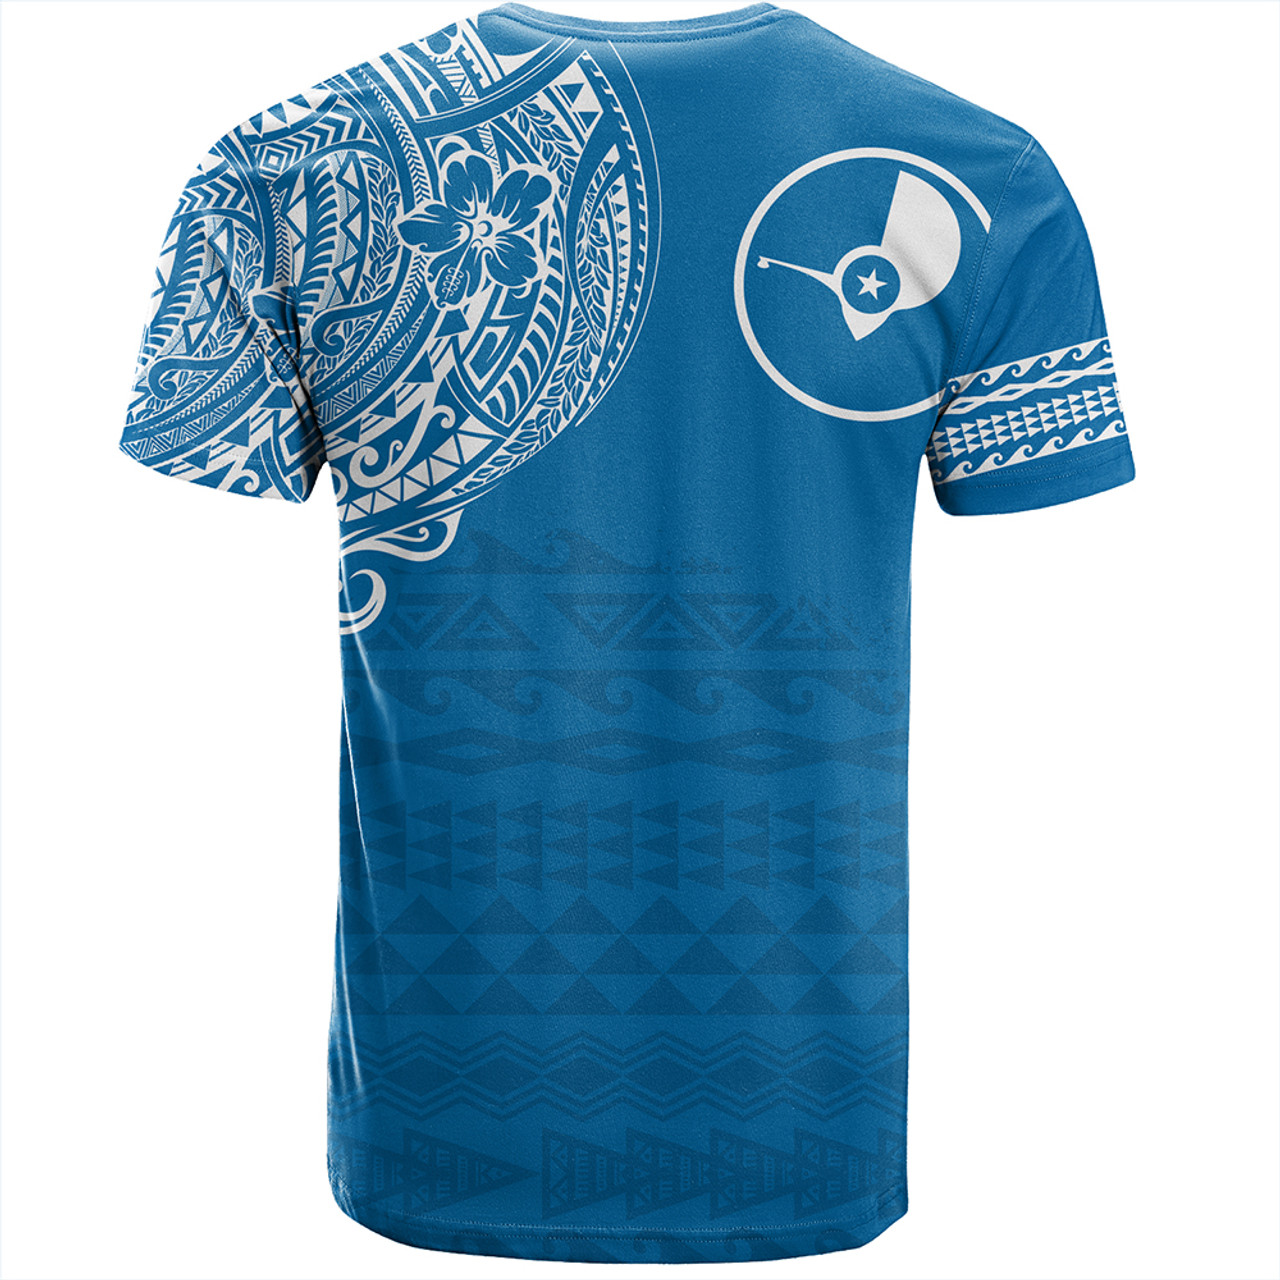 Yap State T-Shirt Polynesian Flag With Coat Of Arms